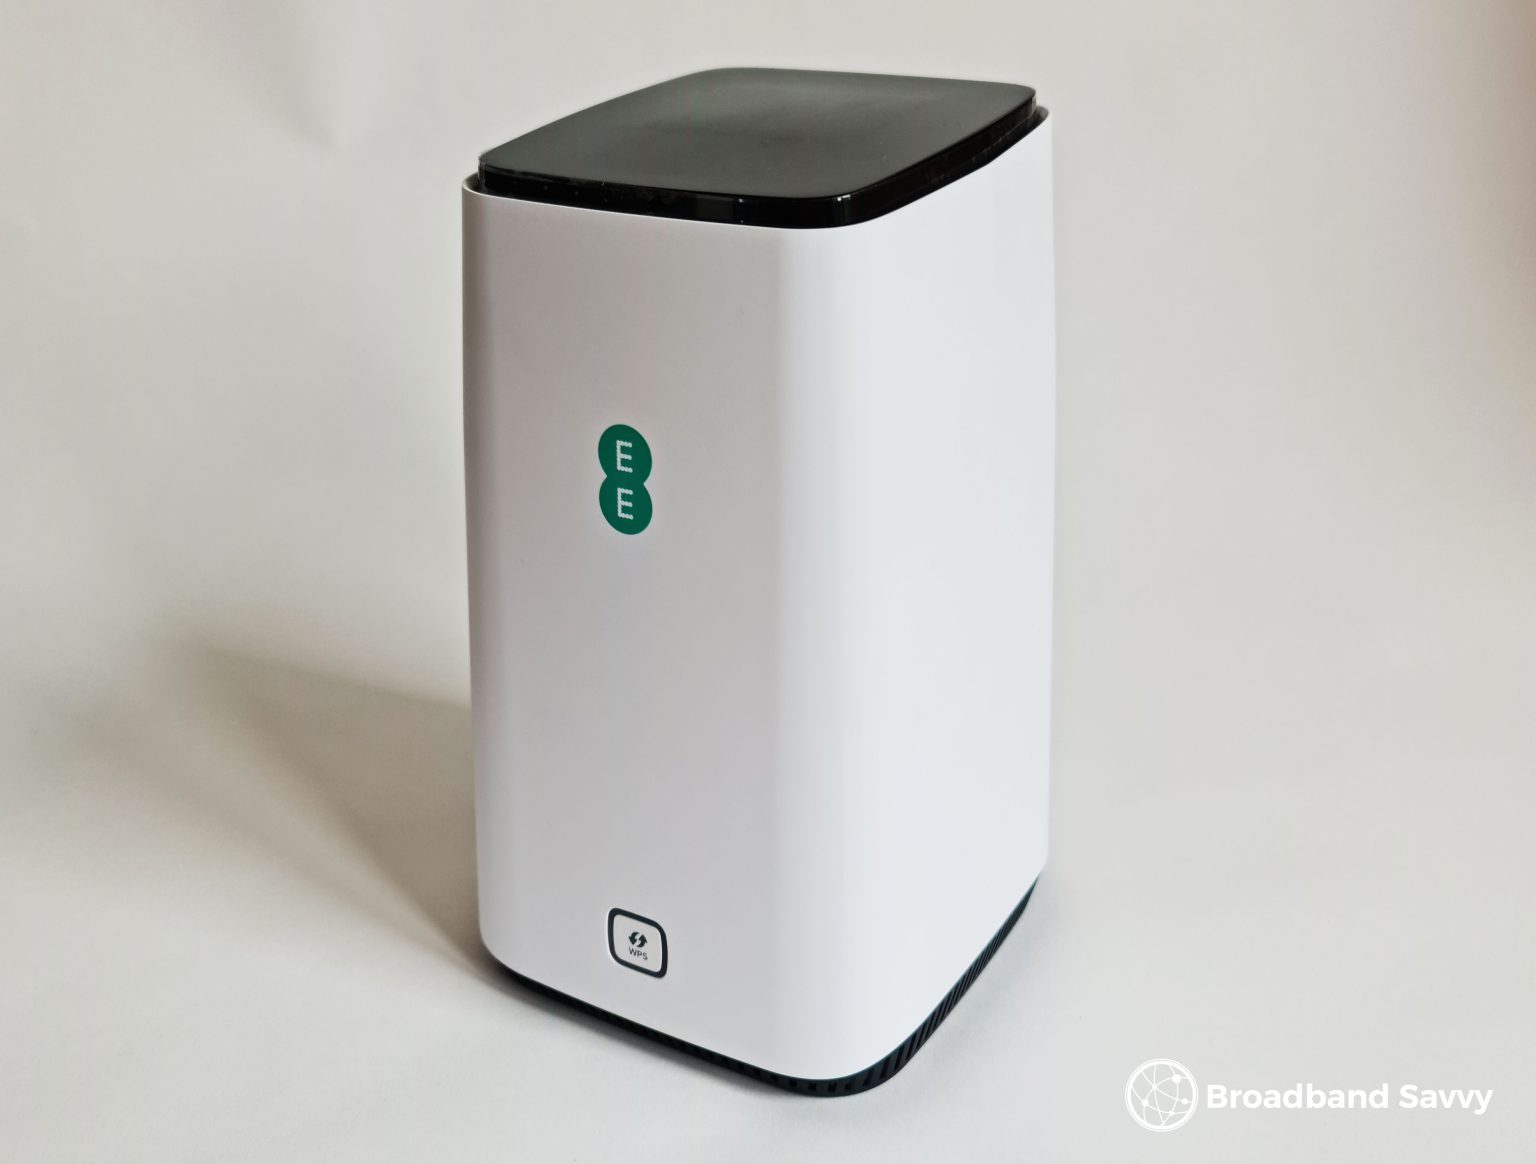 EE 5G Broadband Review | 5GEE Hub Home WiFi Router